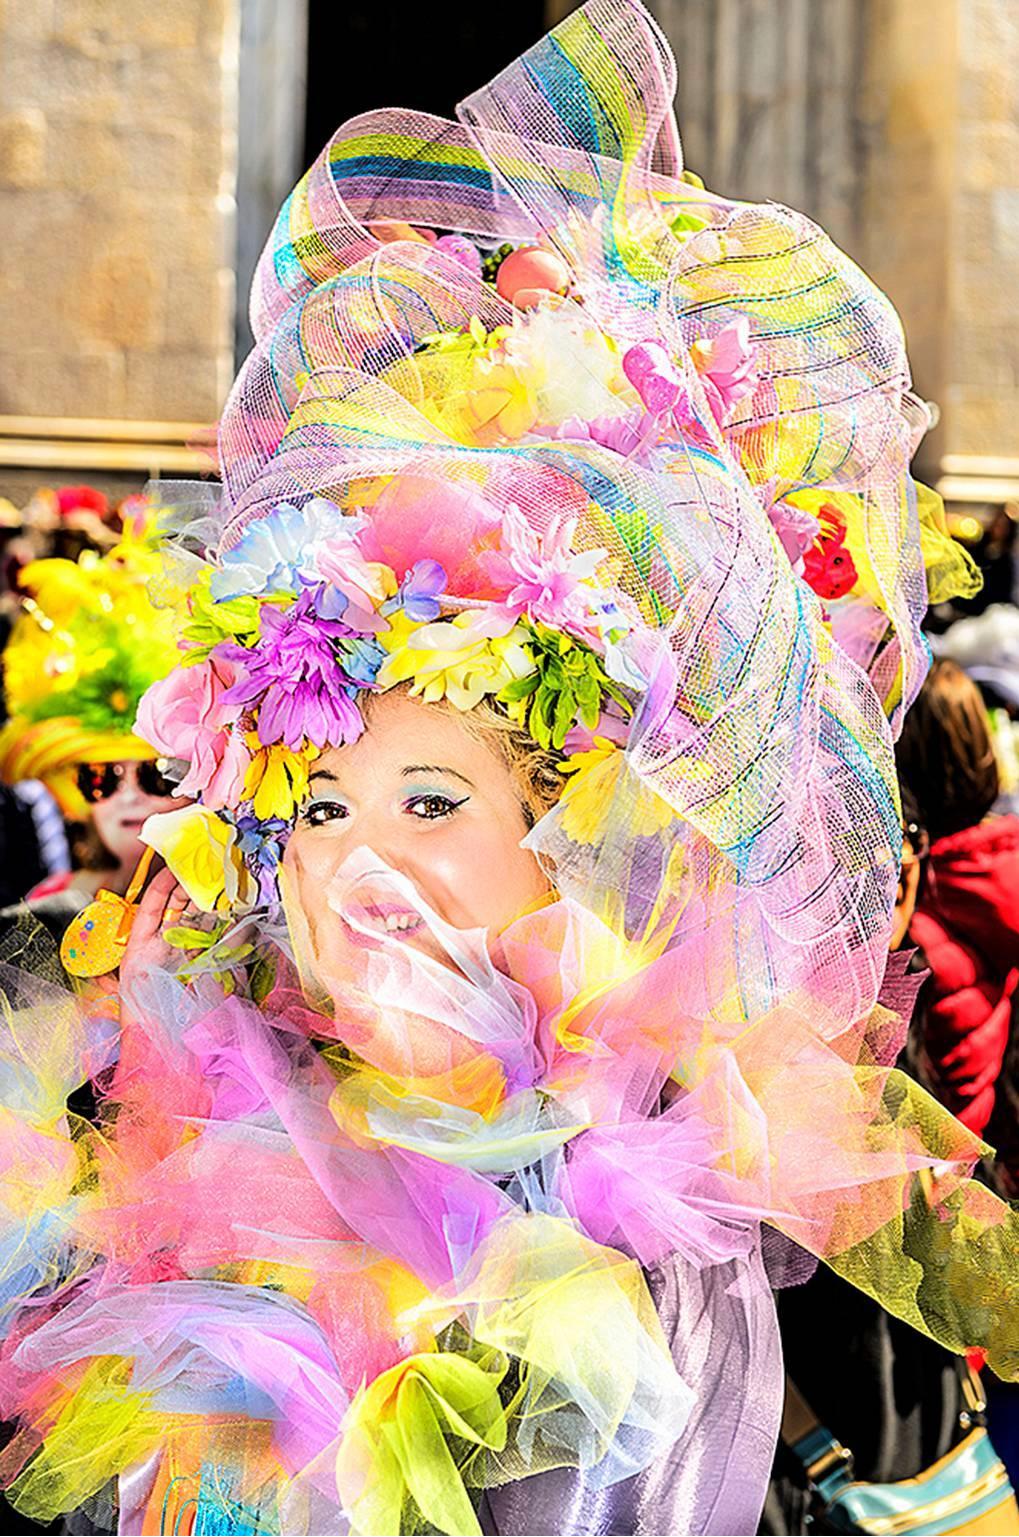 Mitchell Funk Portrait Photograph - Beautiful Flower Woman on Fifth Avenue Easter Parade, Fine Art Photography